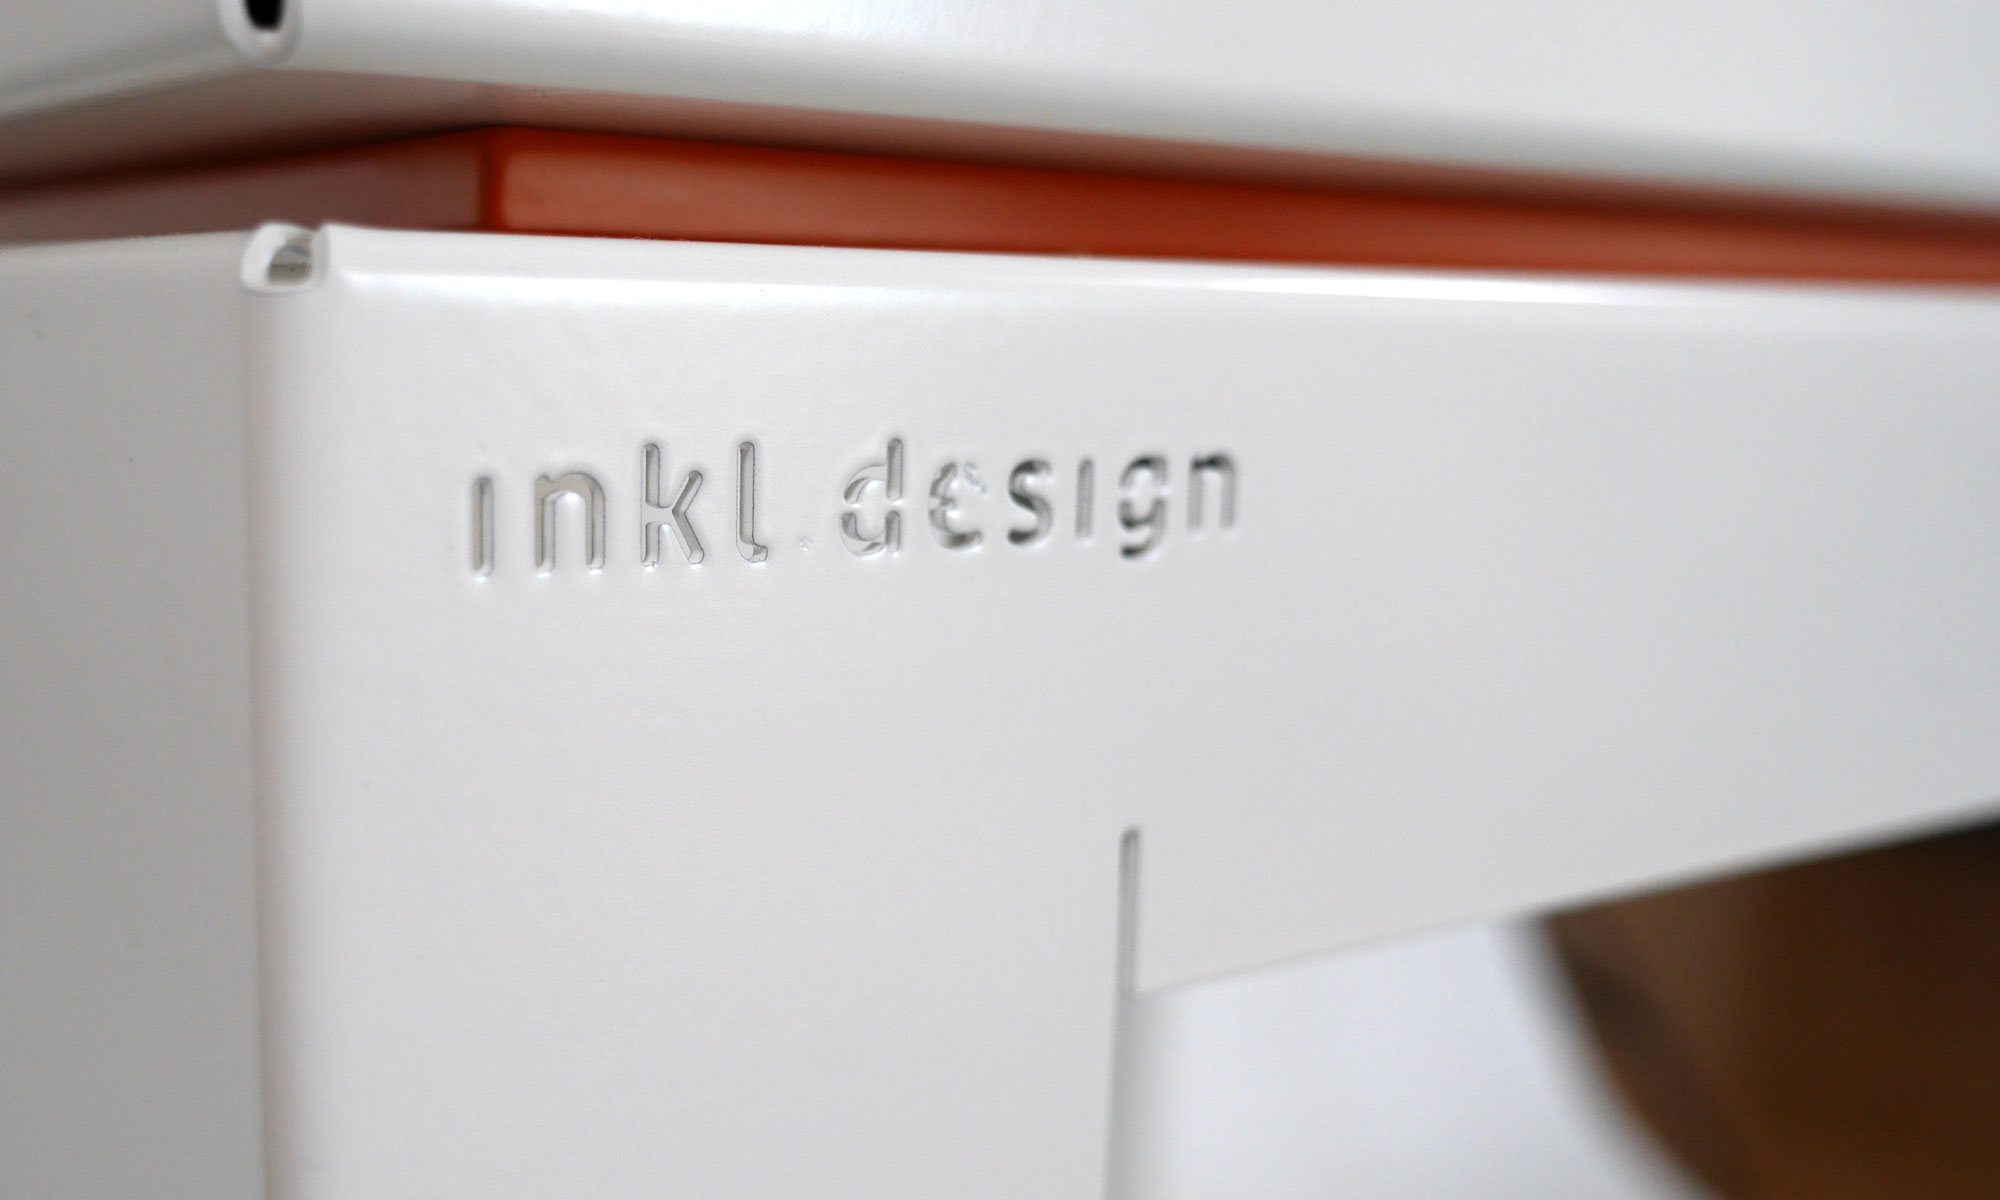 Detail of the engraving "inkl. design" on the white table supporting the model.